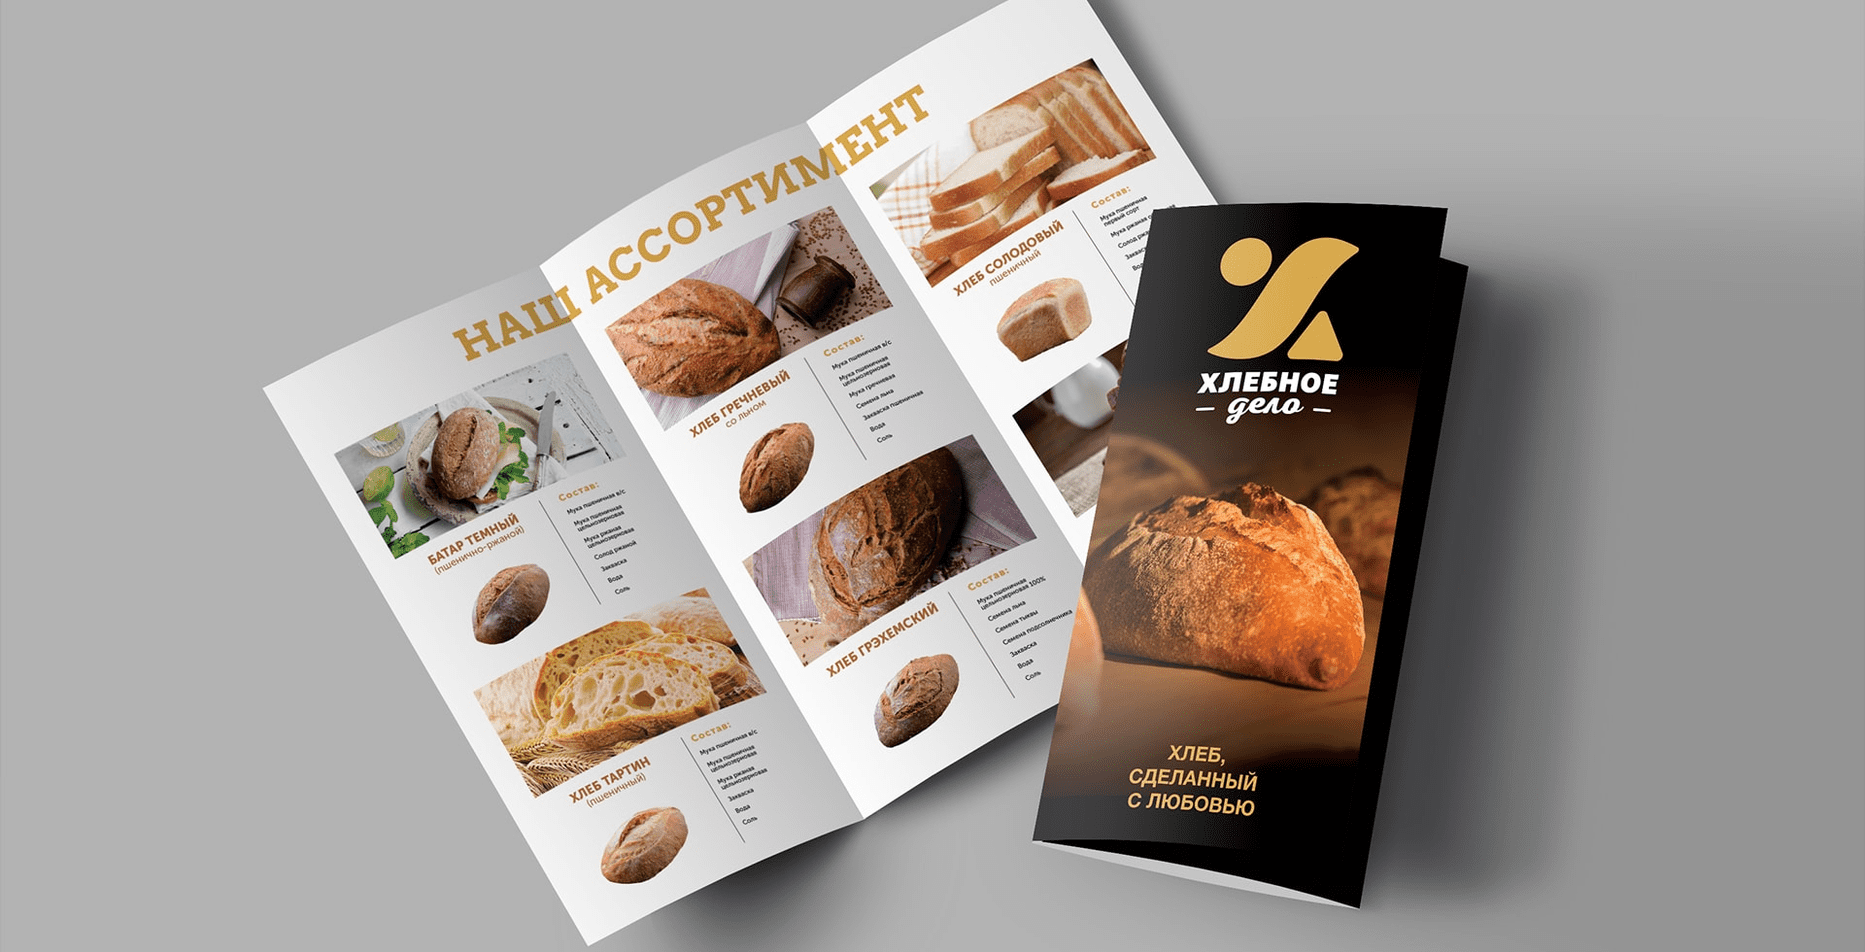 Case: logo design, branding and marketing kit for the bread business — Rubarb - Image - 10